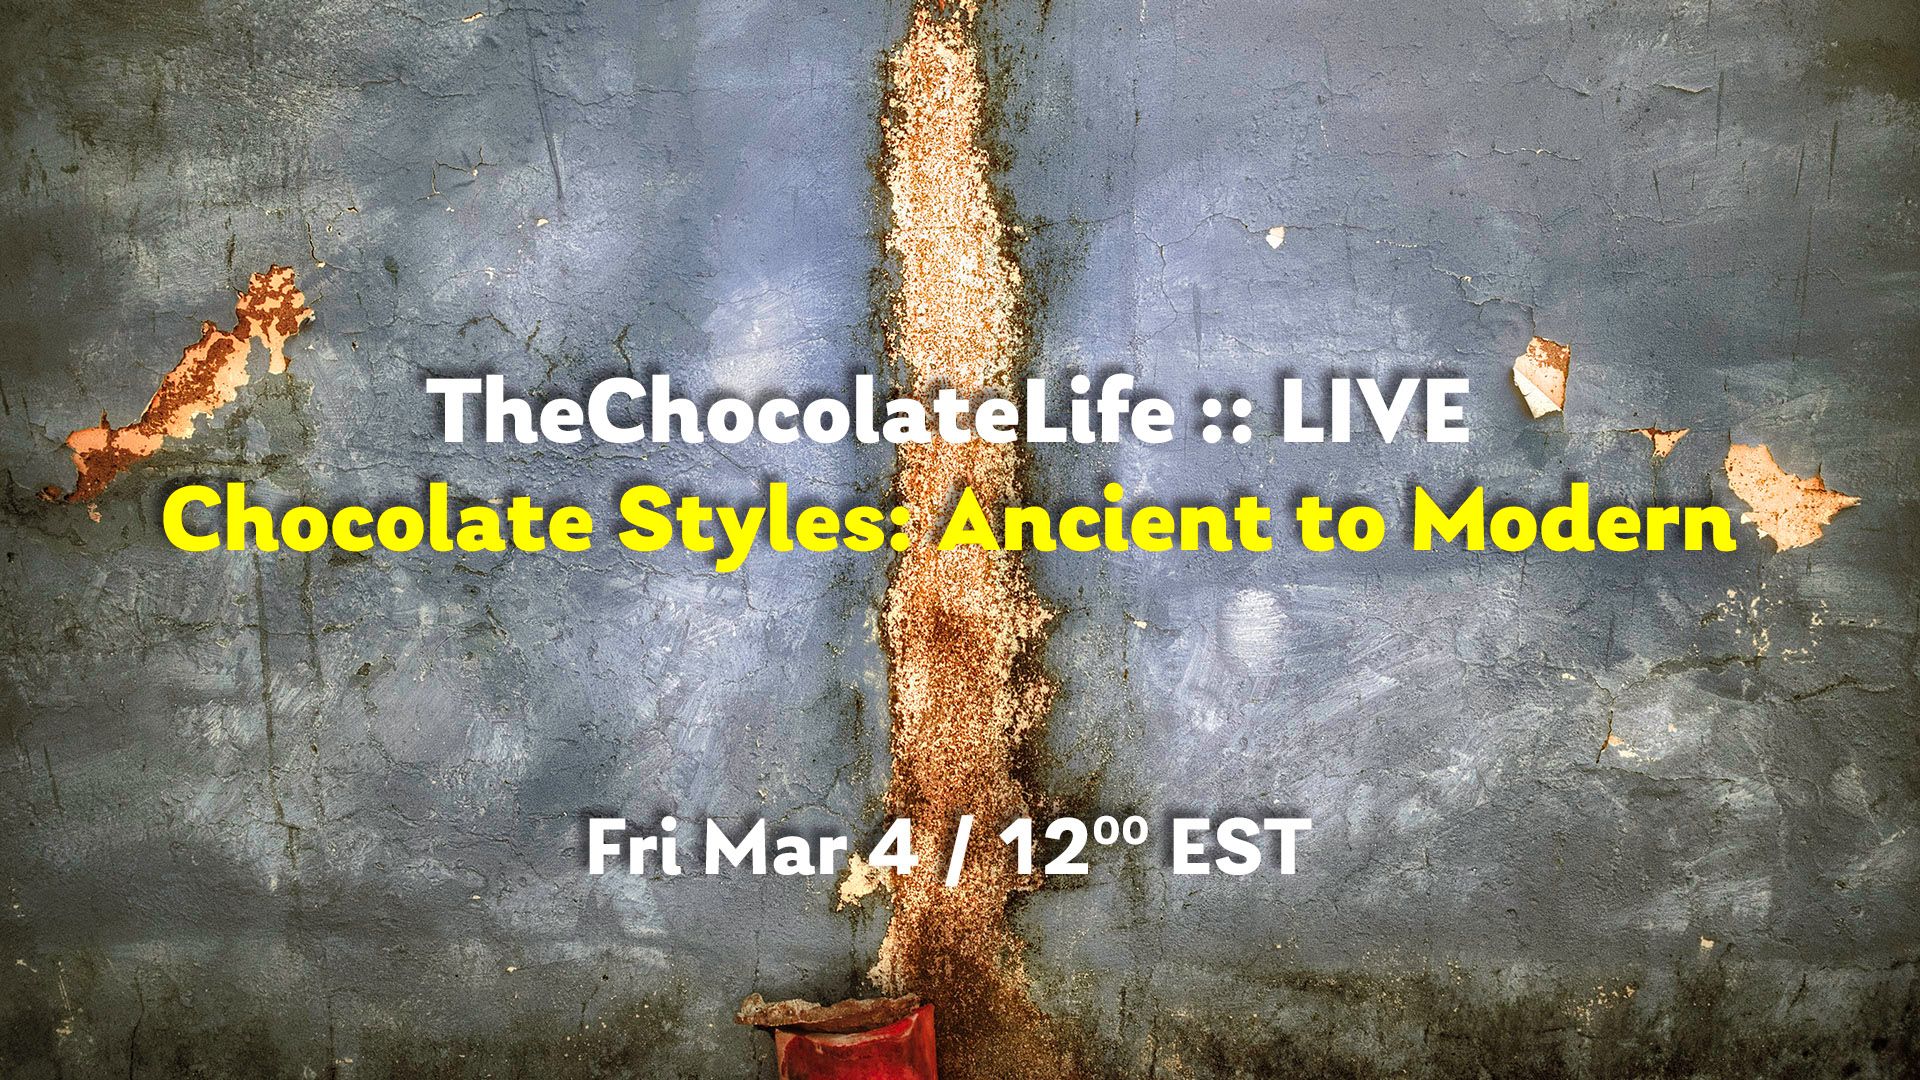 TheChocolateLife :: LIVE – Chocolate Styles, Ancient & Modern